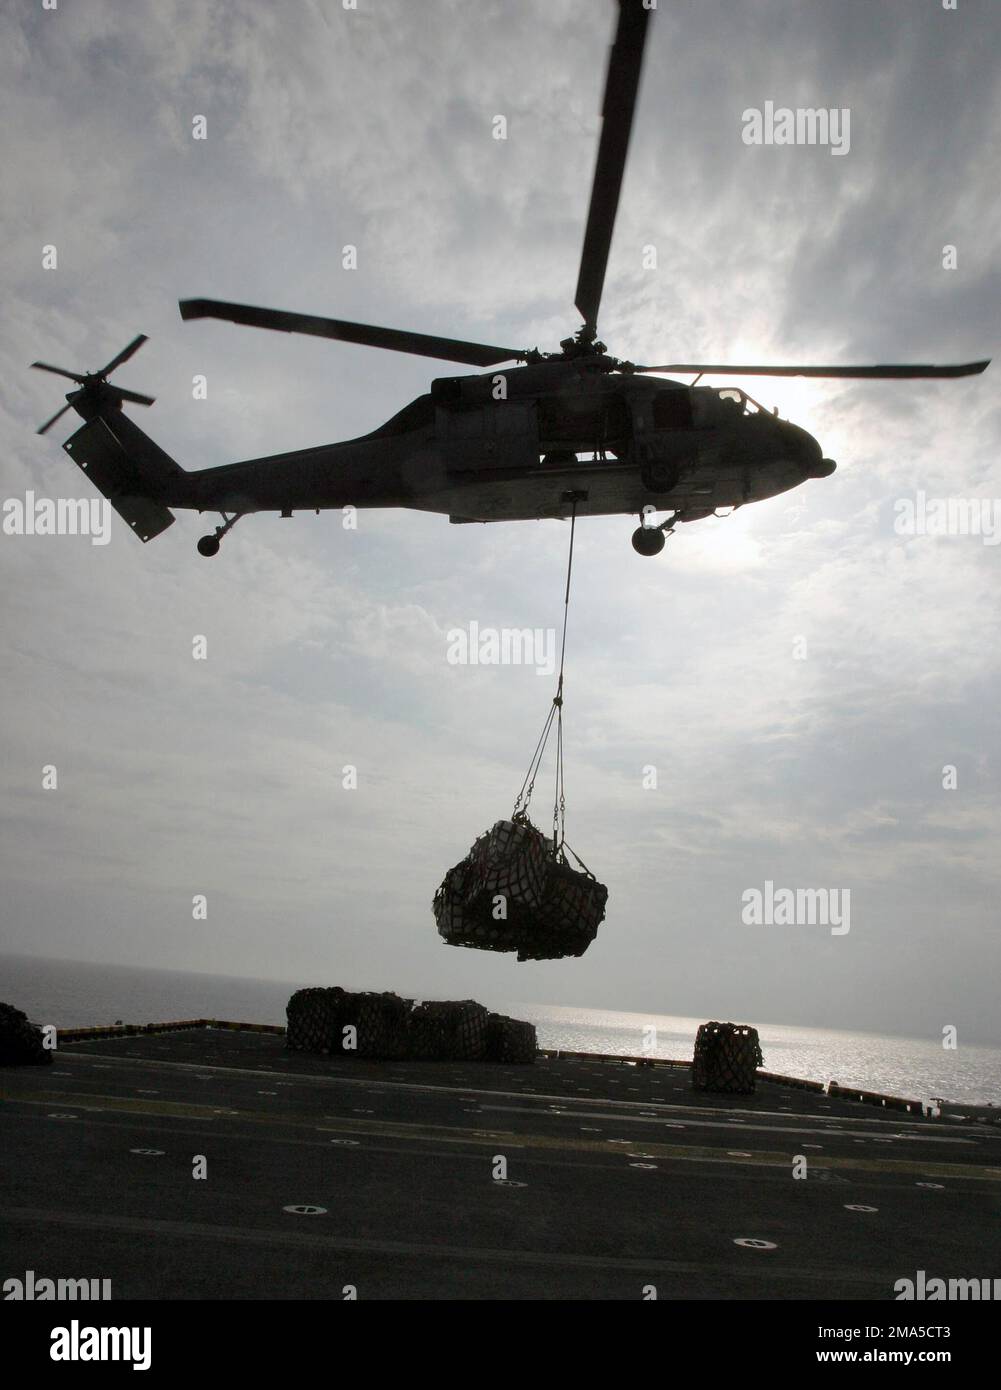 A US Marine Corps (USMC) MH-60S with the 15th Marine Expeditionary Unit (MEU) Special Operations Capable (SOC), delivers a cargo net full of humanitarian aid supplies onto the flight deck of the Amphibious Assault Ship USS BONHOMME RICHARD (LHD 6). The aid is being distributed to victims of the tsunami on the western side of Sumatra. Base: USS Bonhomme Richard (LHD 6) Stock Photo